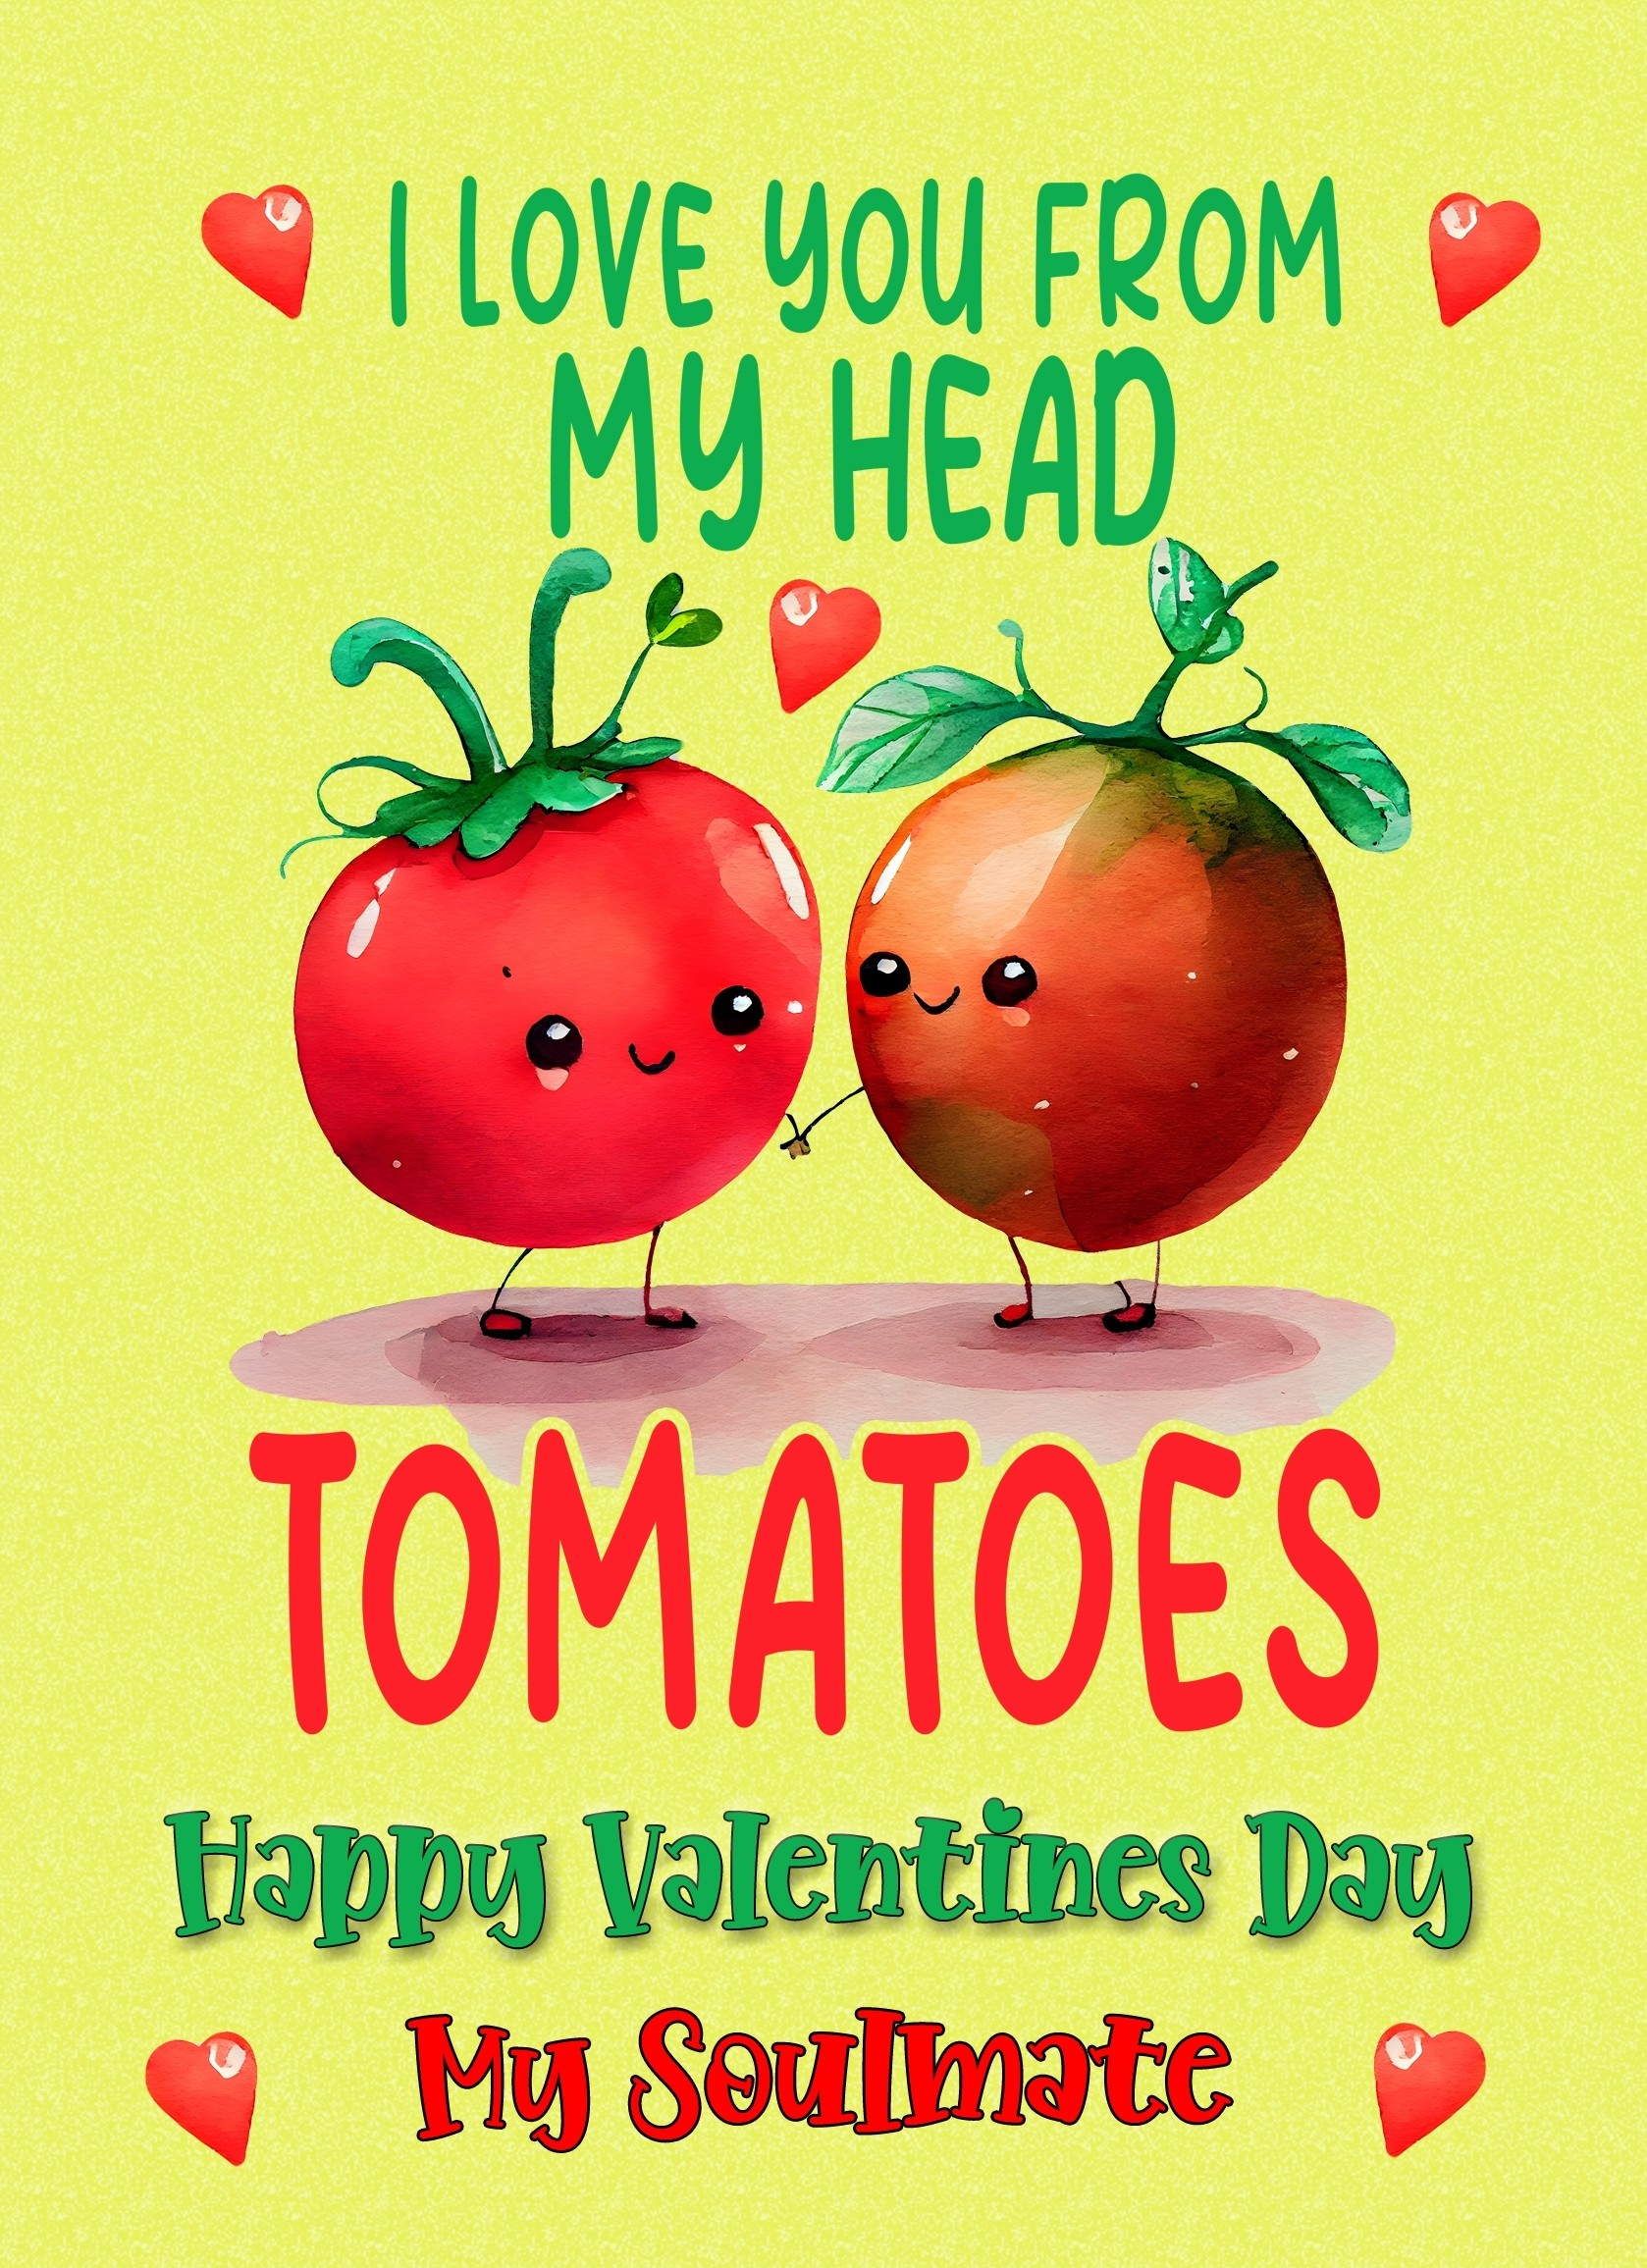 Funny Pun Valentines Day Card for Soulmate (Tomatoes)